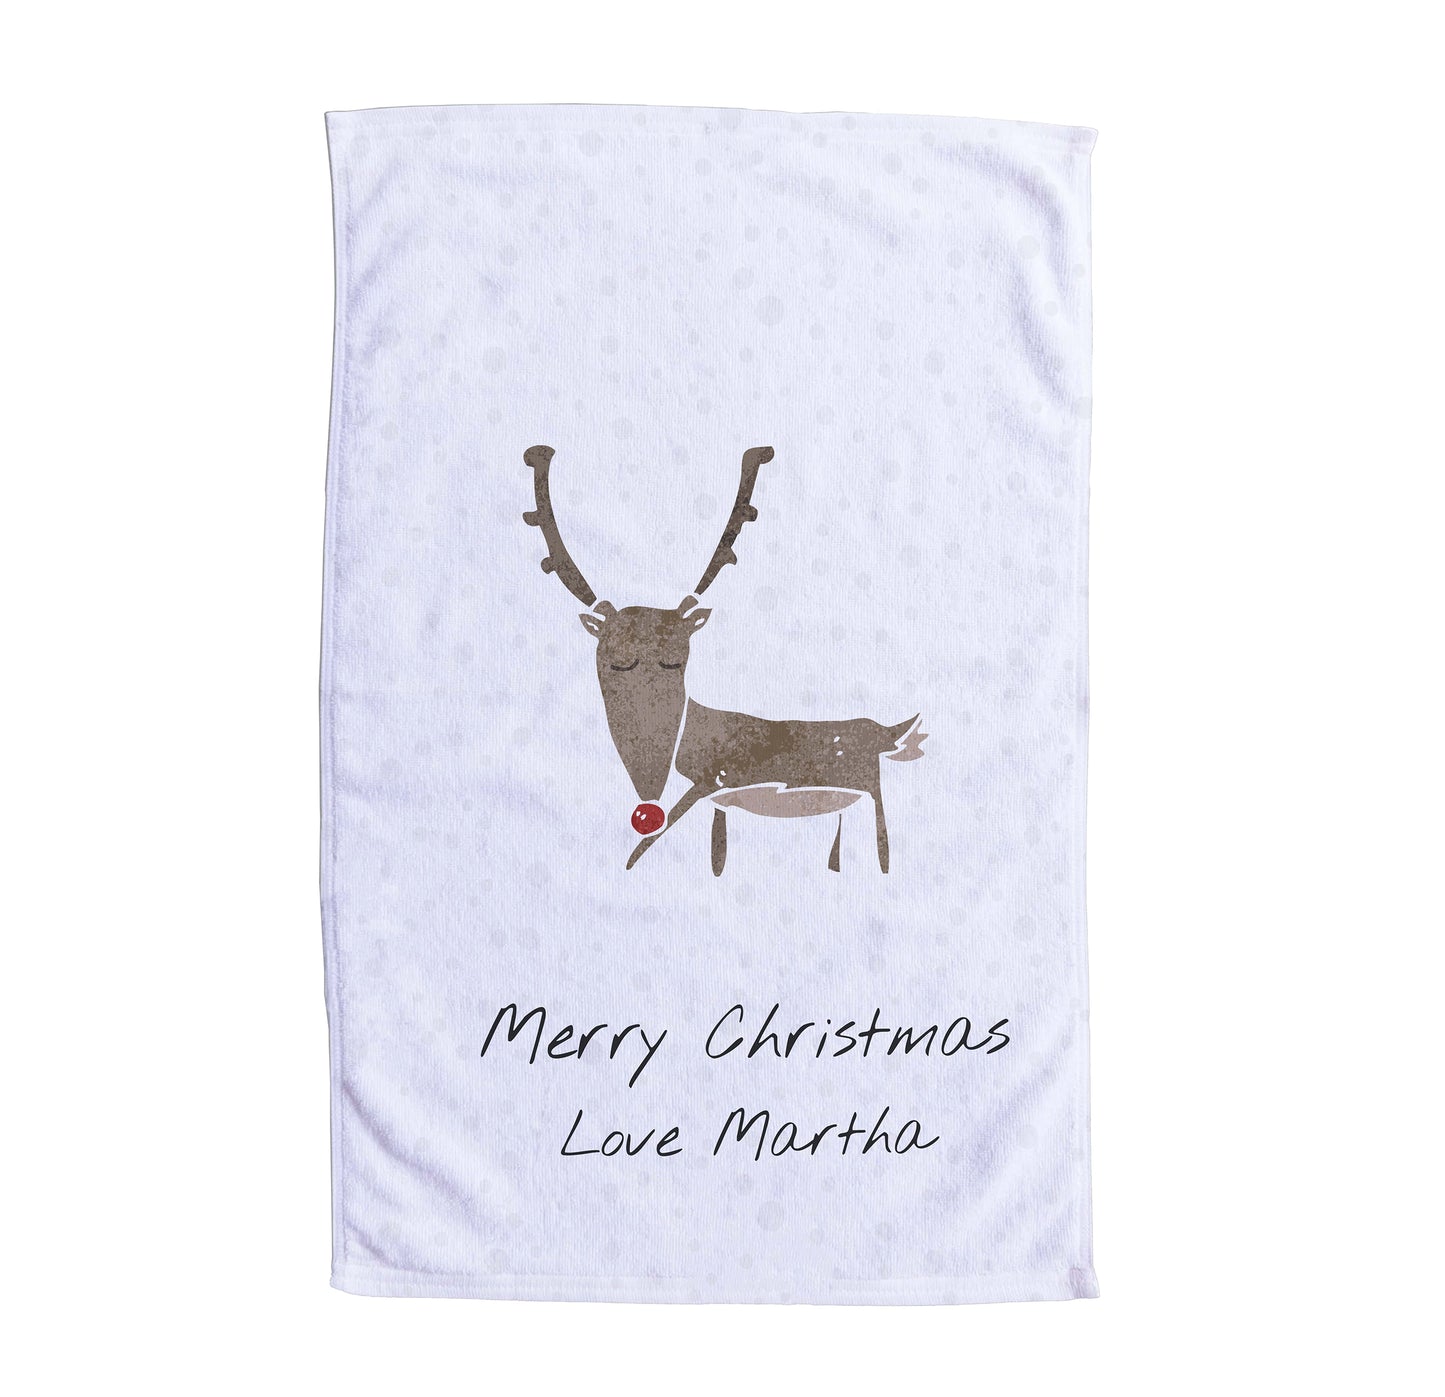 Personalised Photo Christmas Tea Towel. Merry Christmas Personalised Text with Image